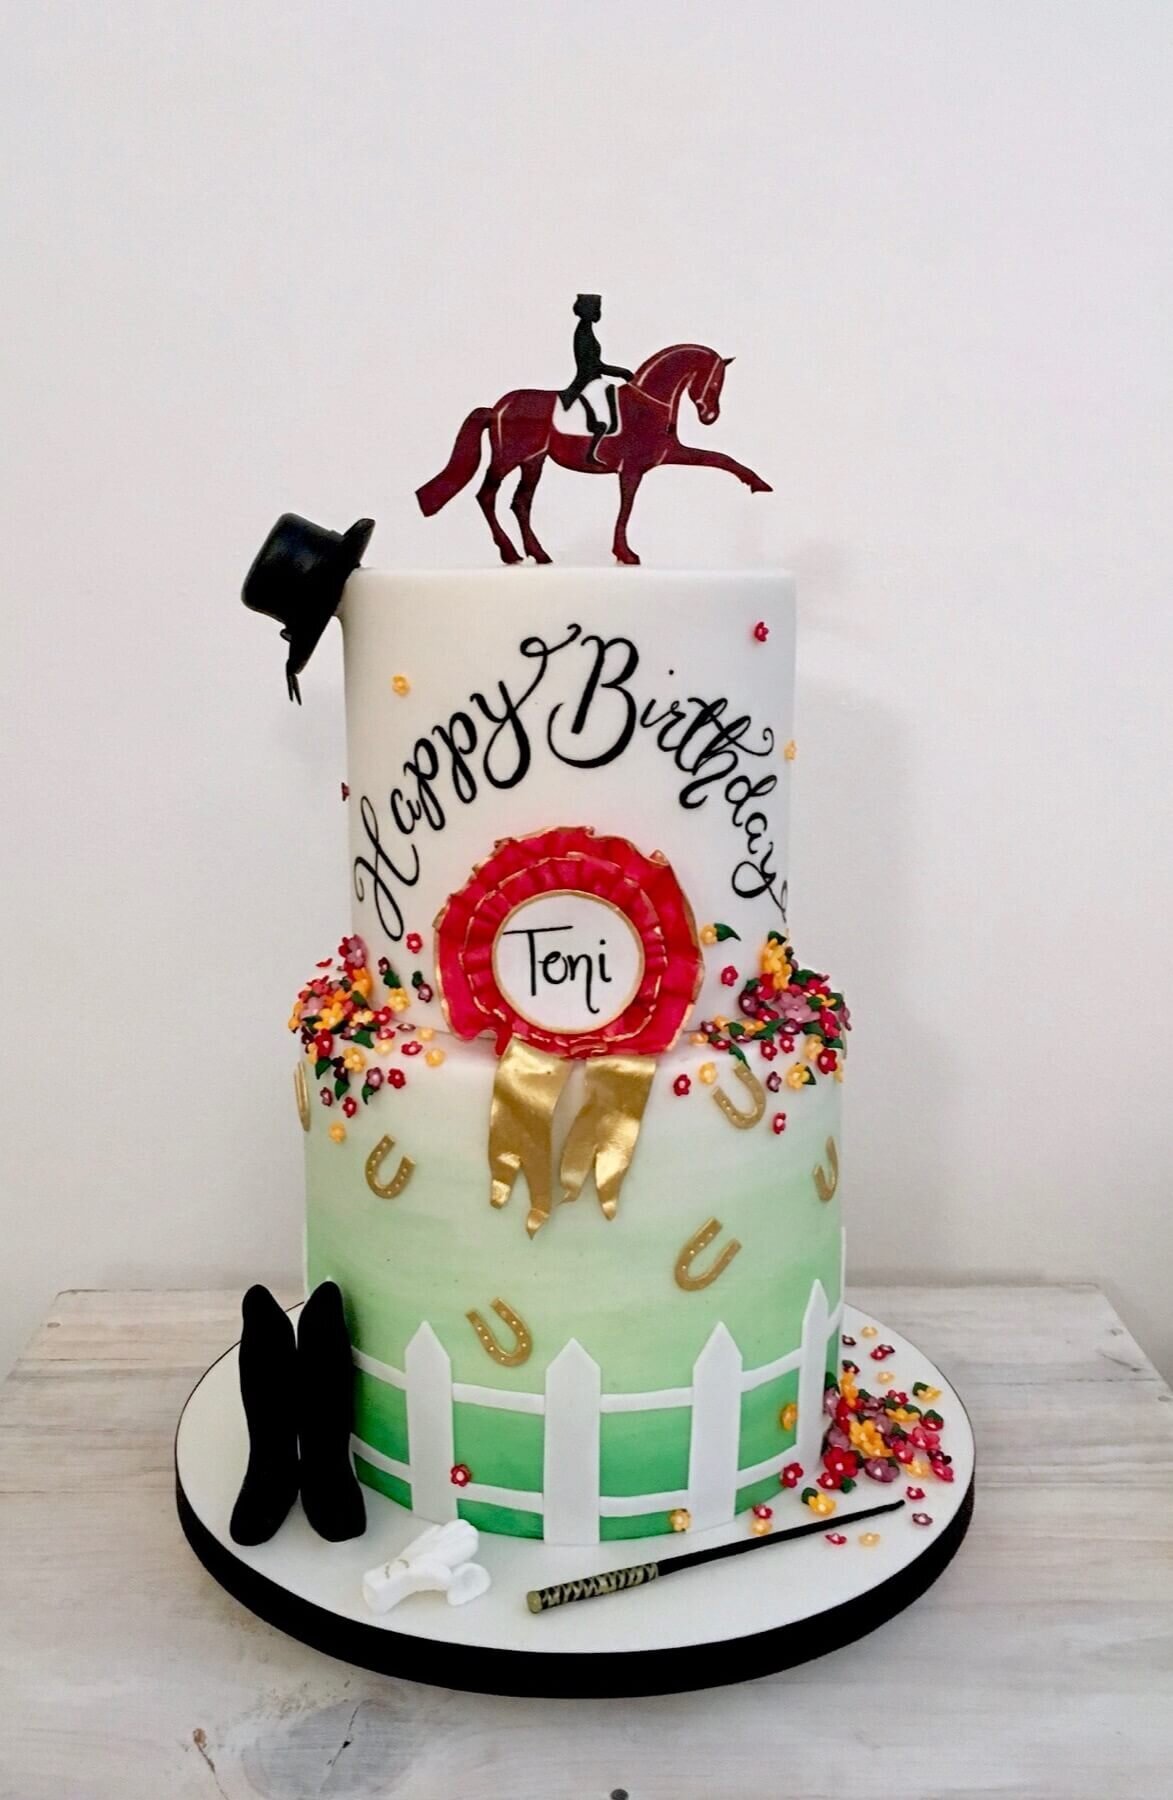 A two tier birthday cake with a horse rider theme showing boots, gloves, a hat, and award and more